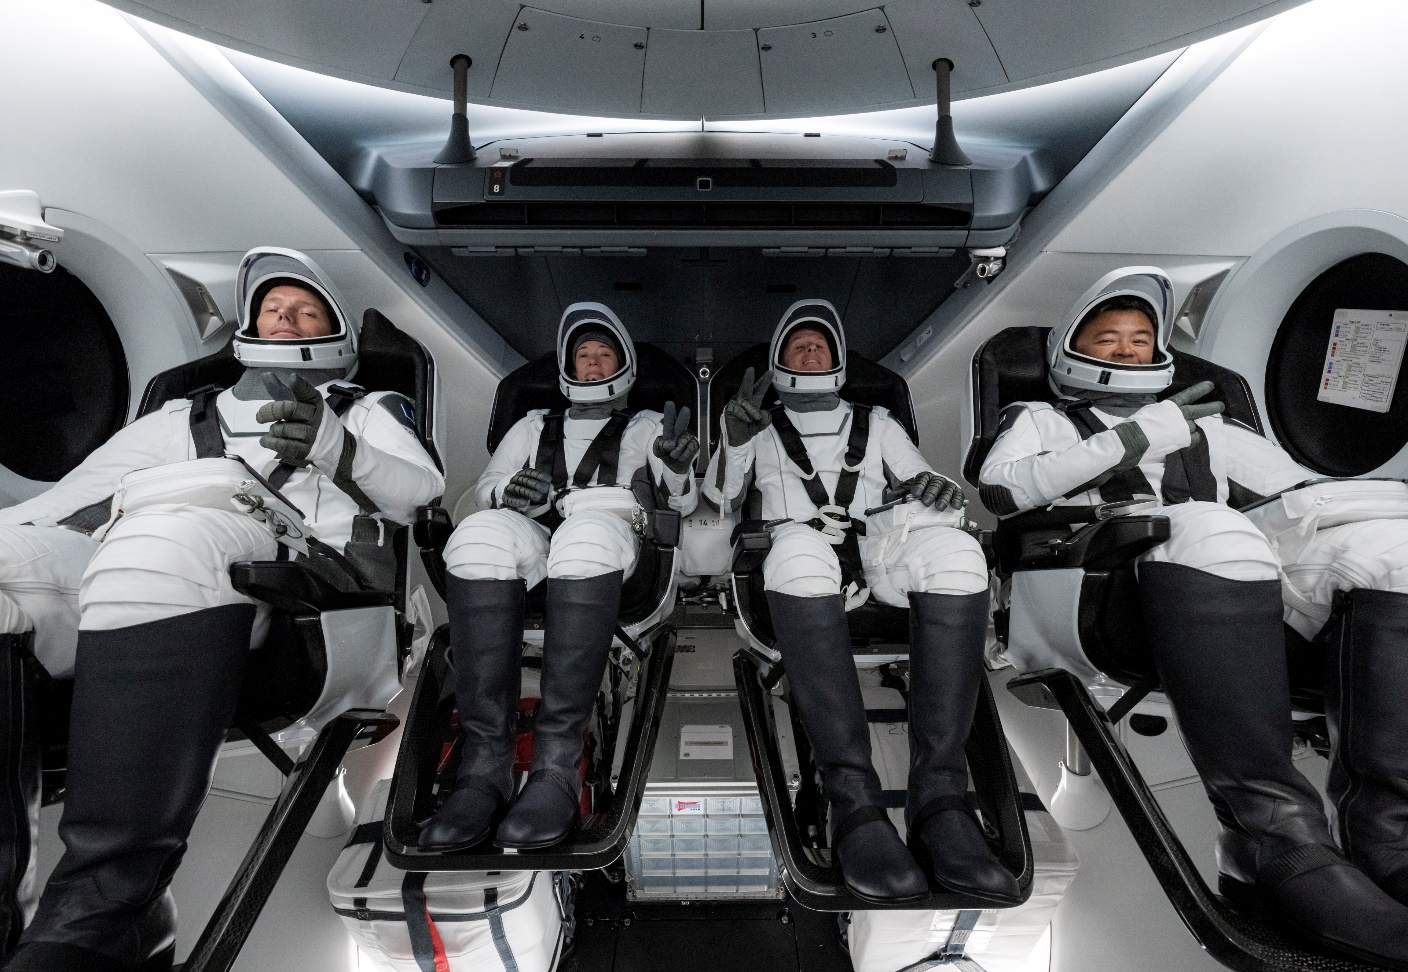 Crew-2 Astronauts Aboard Endeavour, Photo Courtesy SpaceX